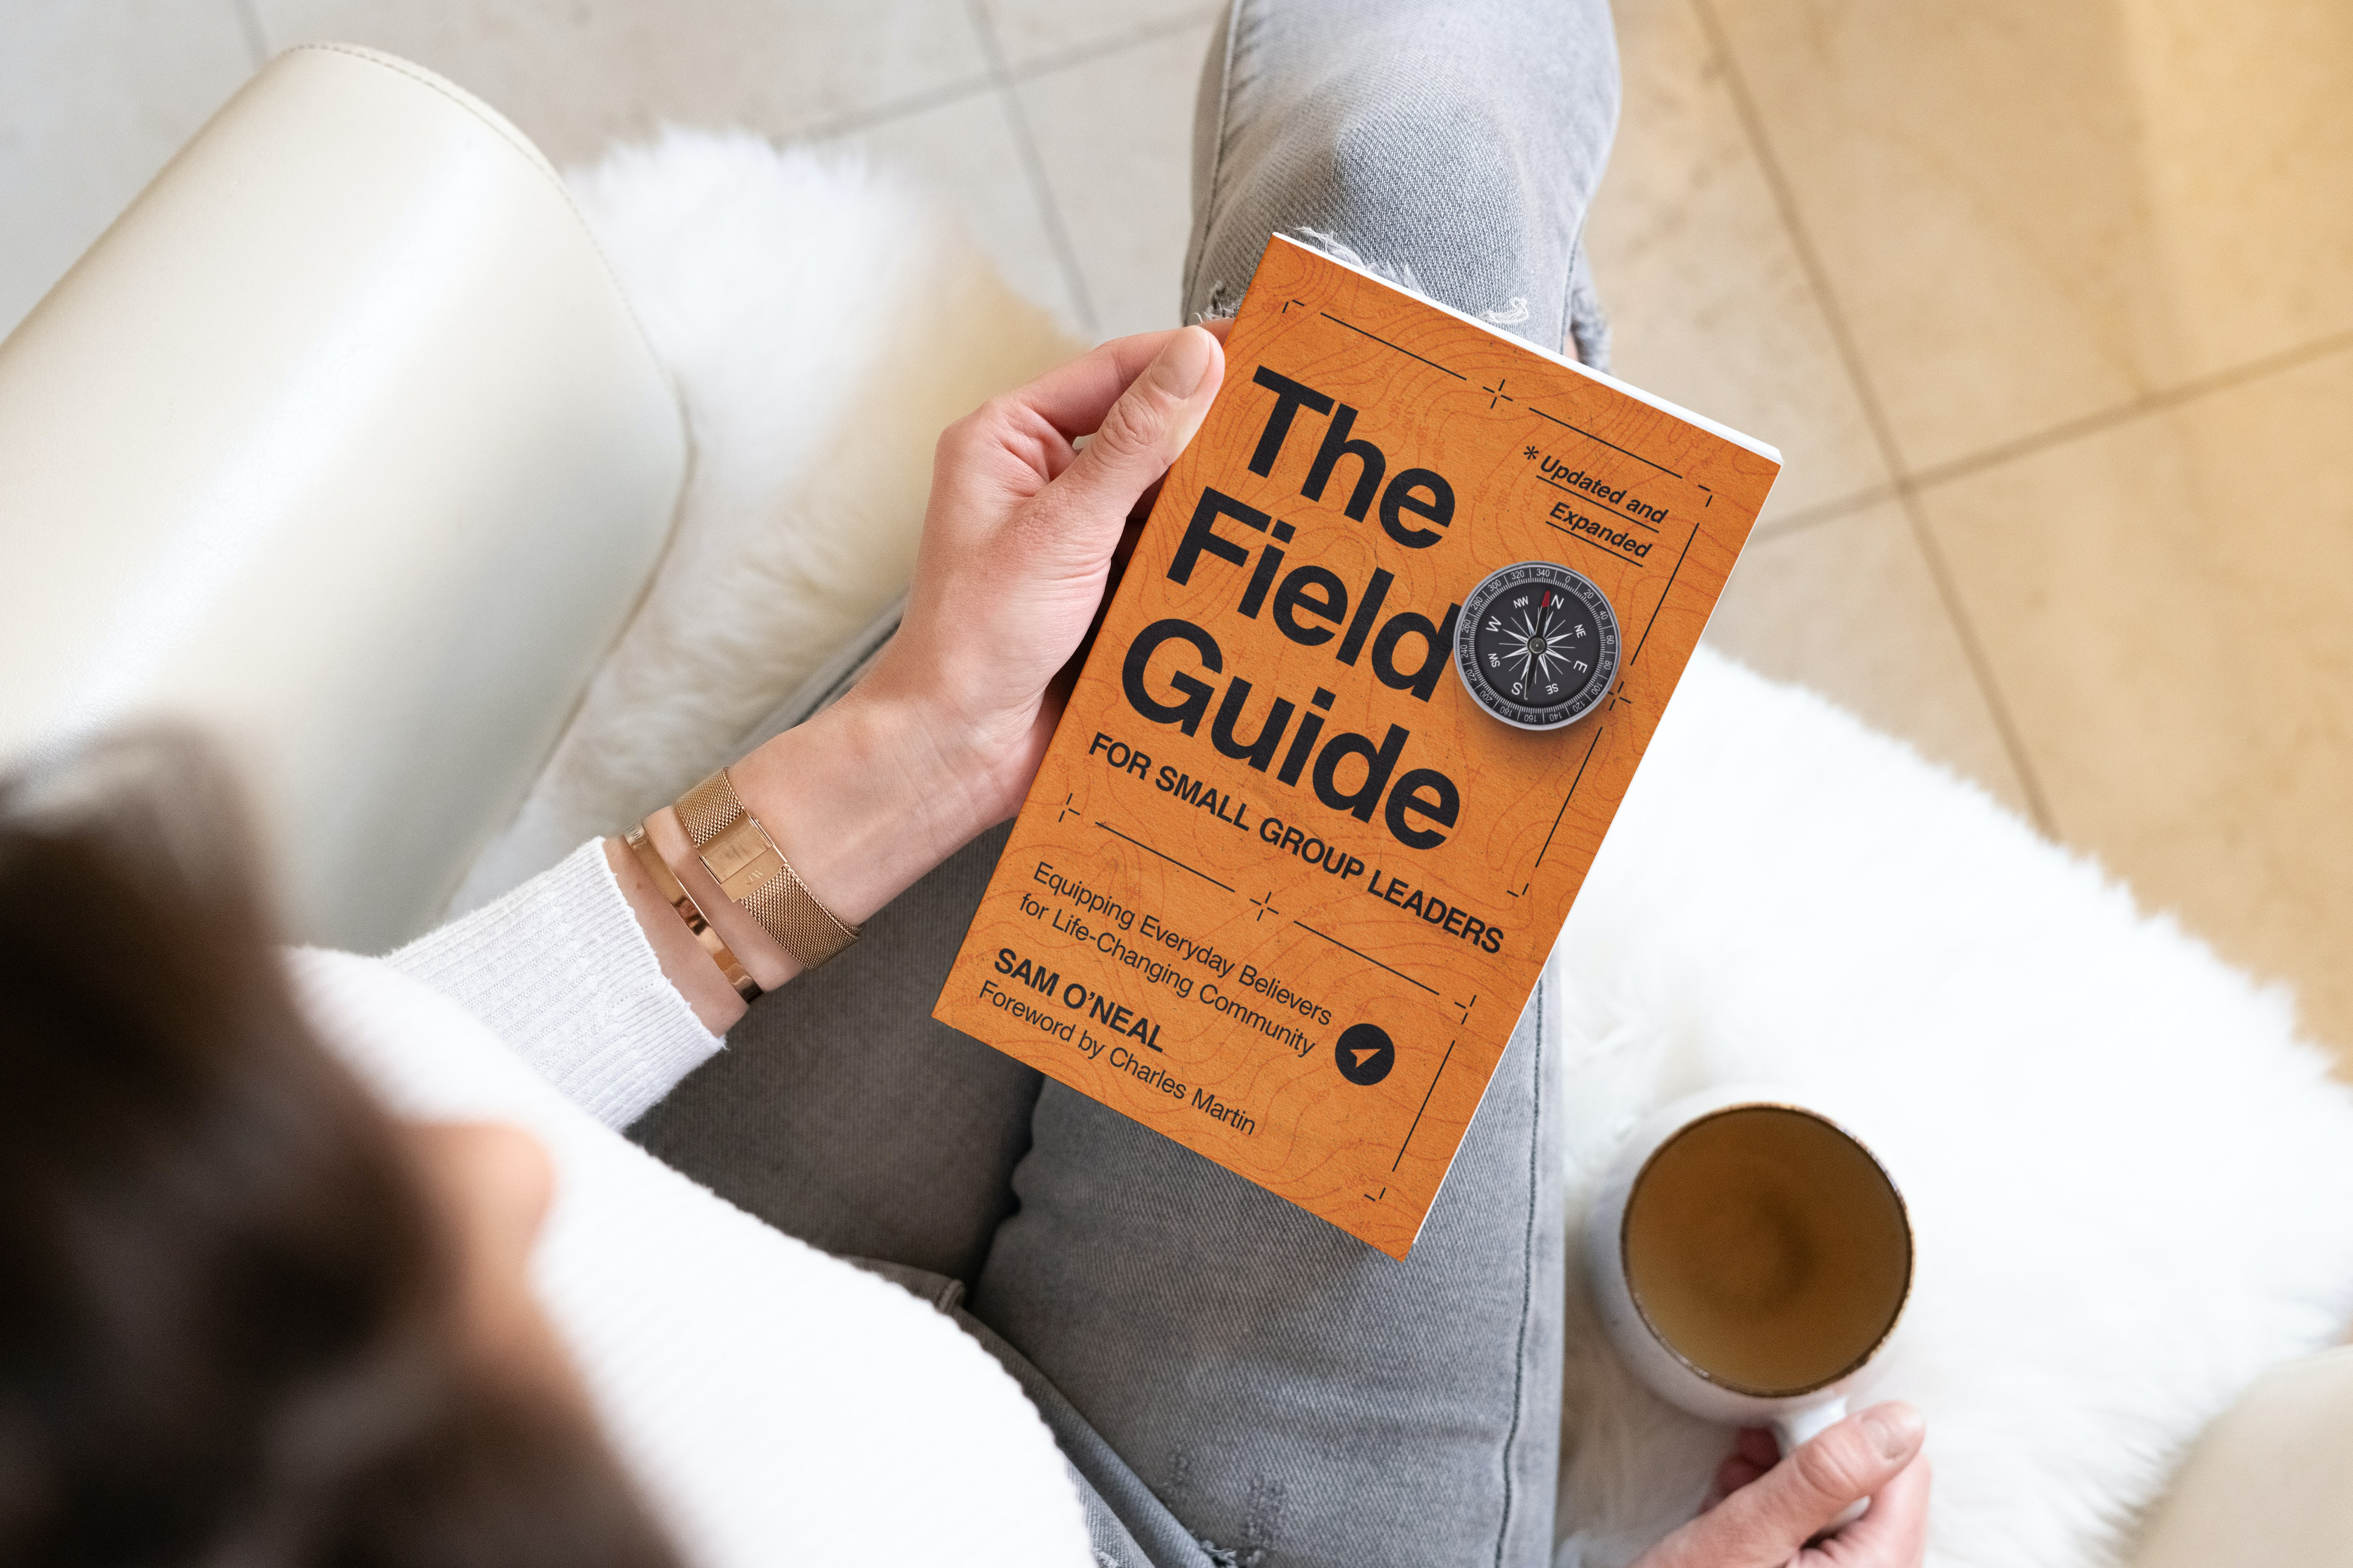 The Field Guide for Small Group Leaders: Equipping Everyday Believers for Life-Changing Community